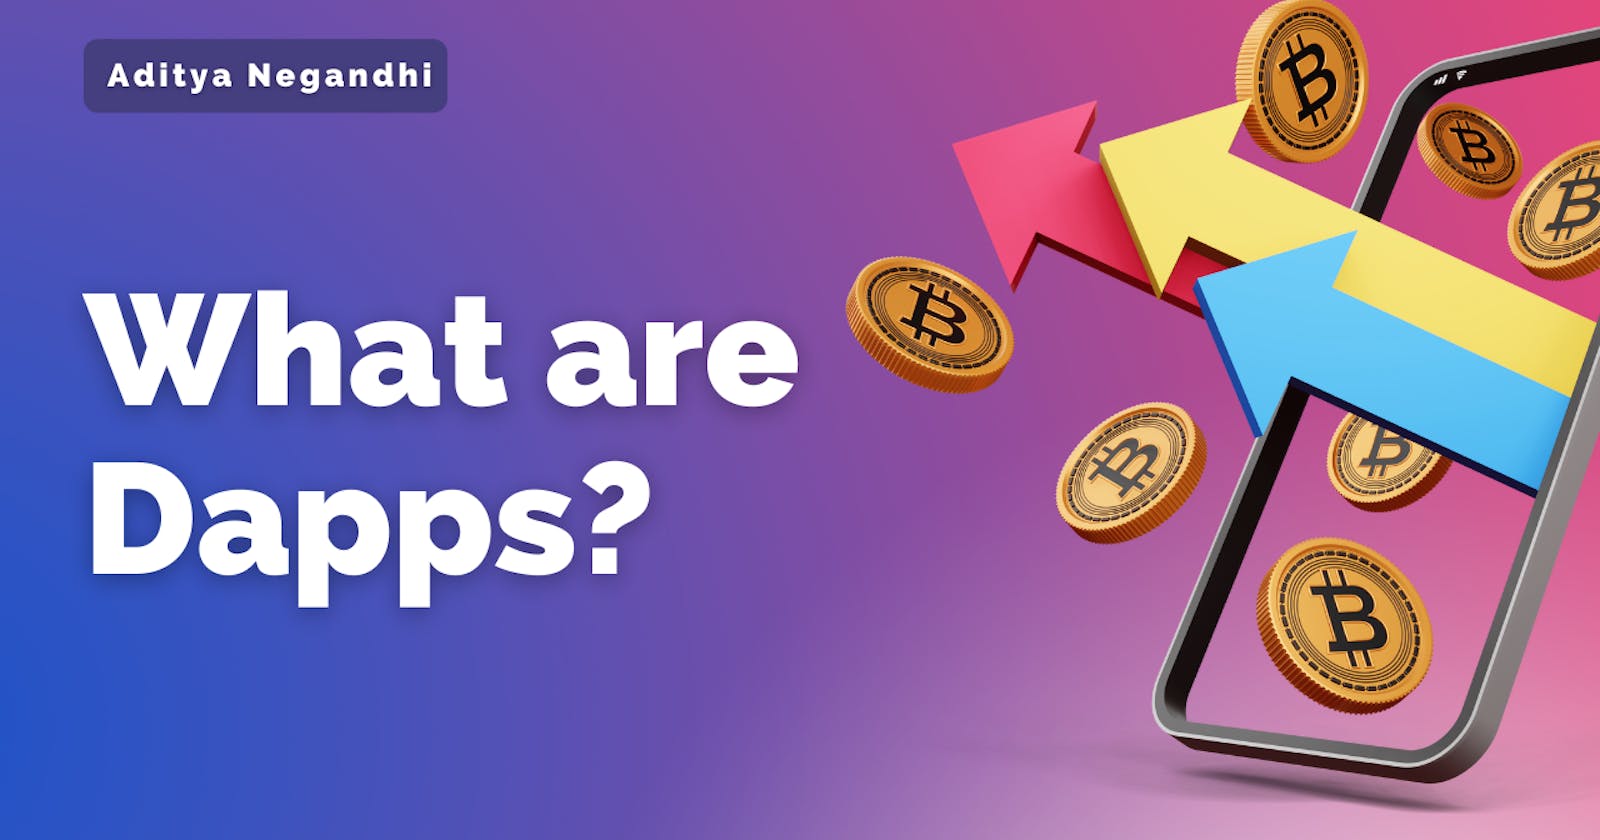 What are Dapps and how are they different from normal apps?